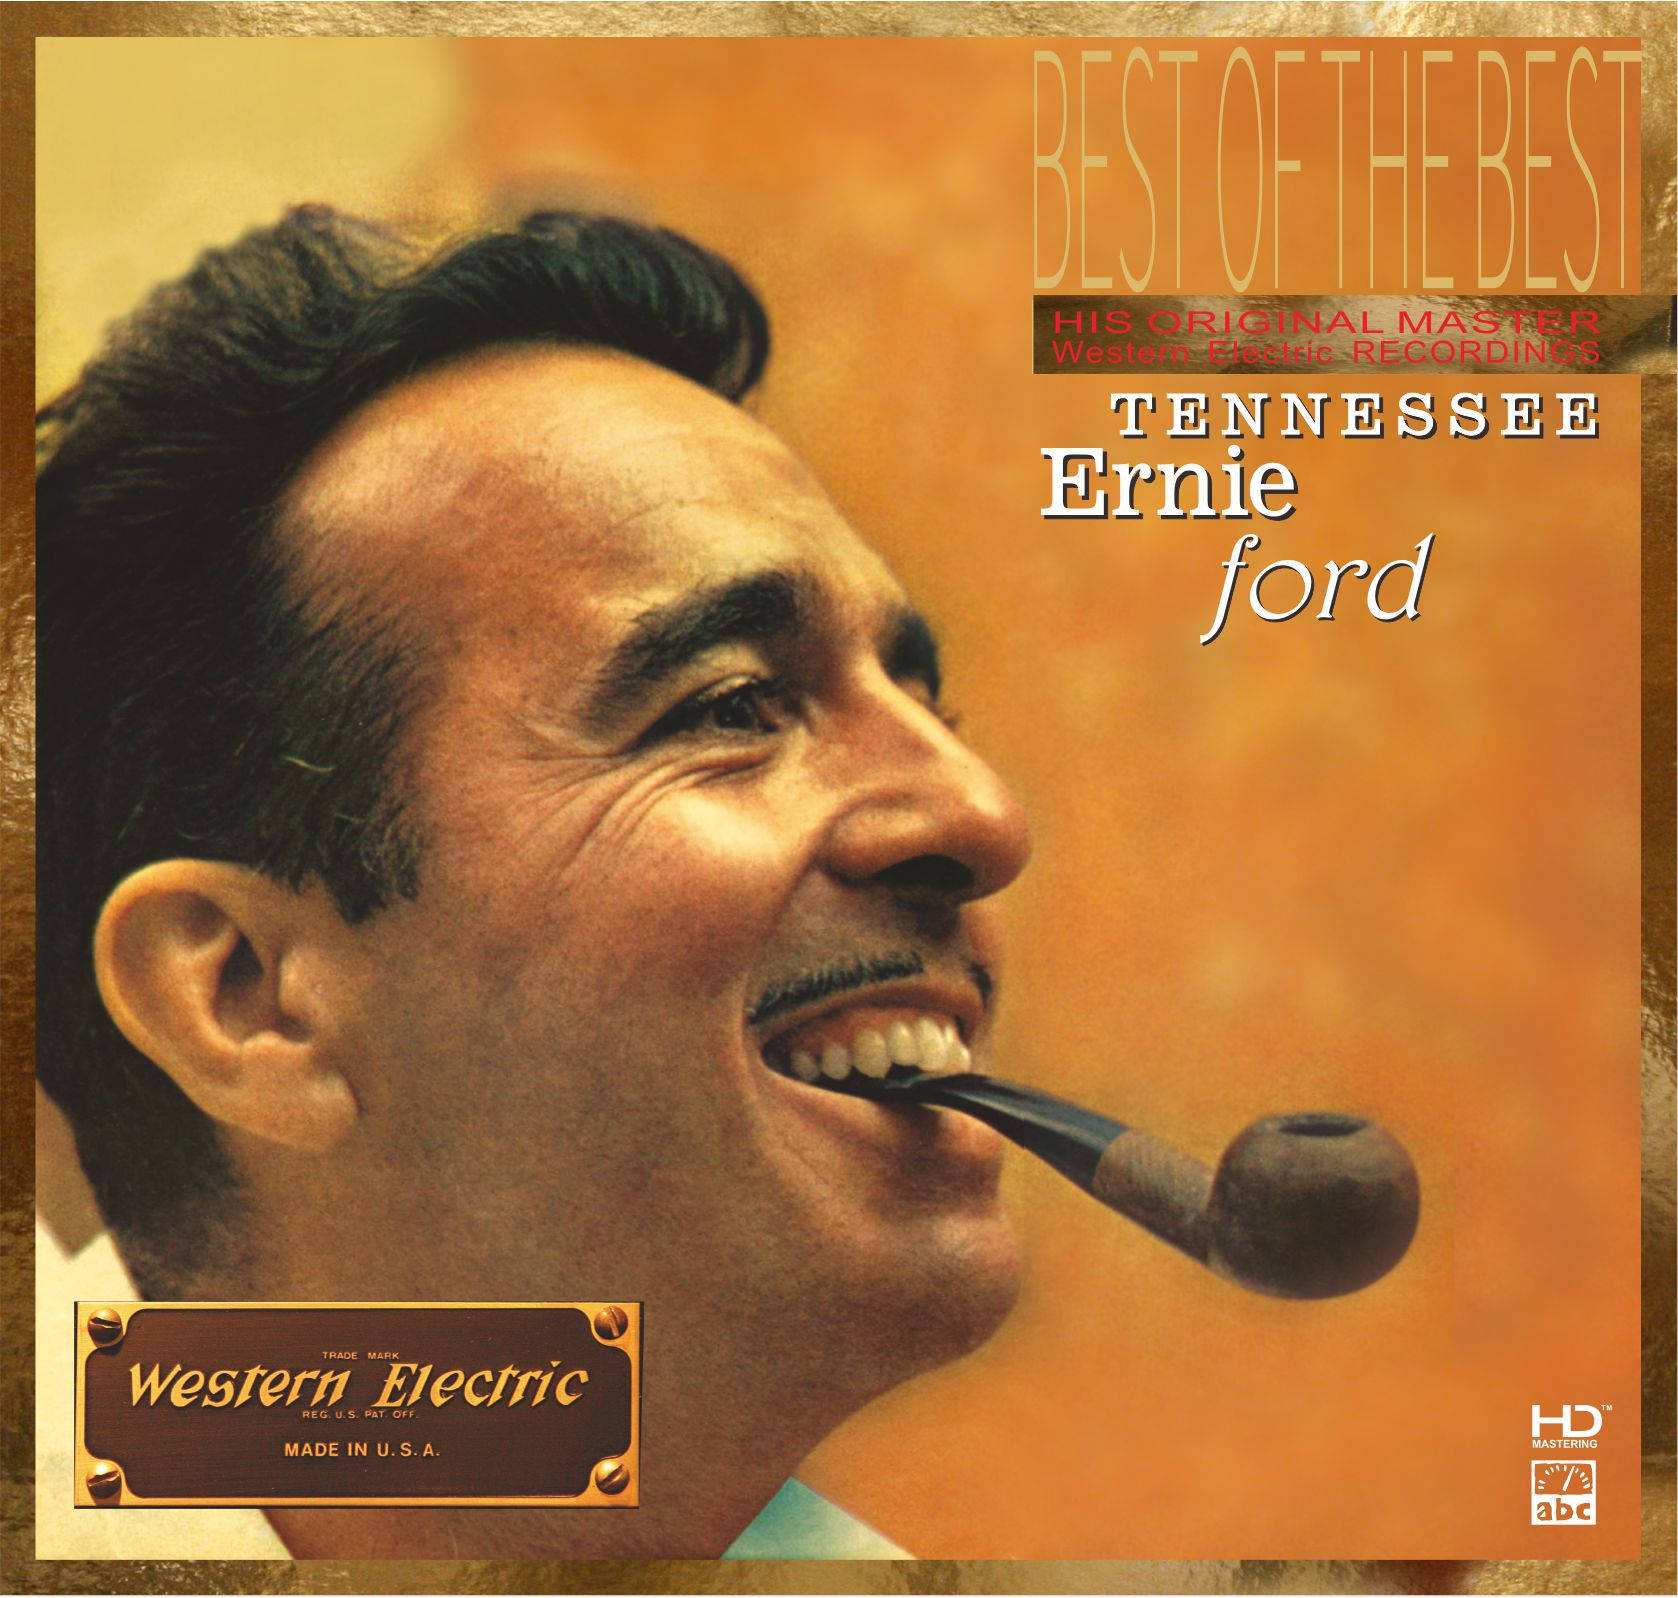 Tennessee Ernie Ford For Best Of The Best Album Wallpaper